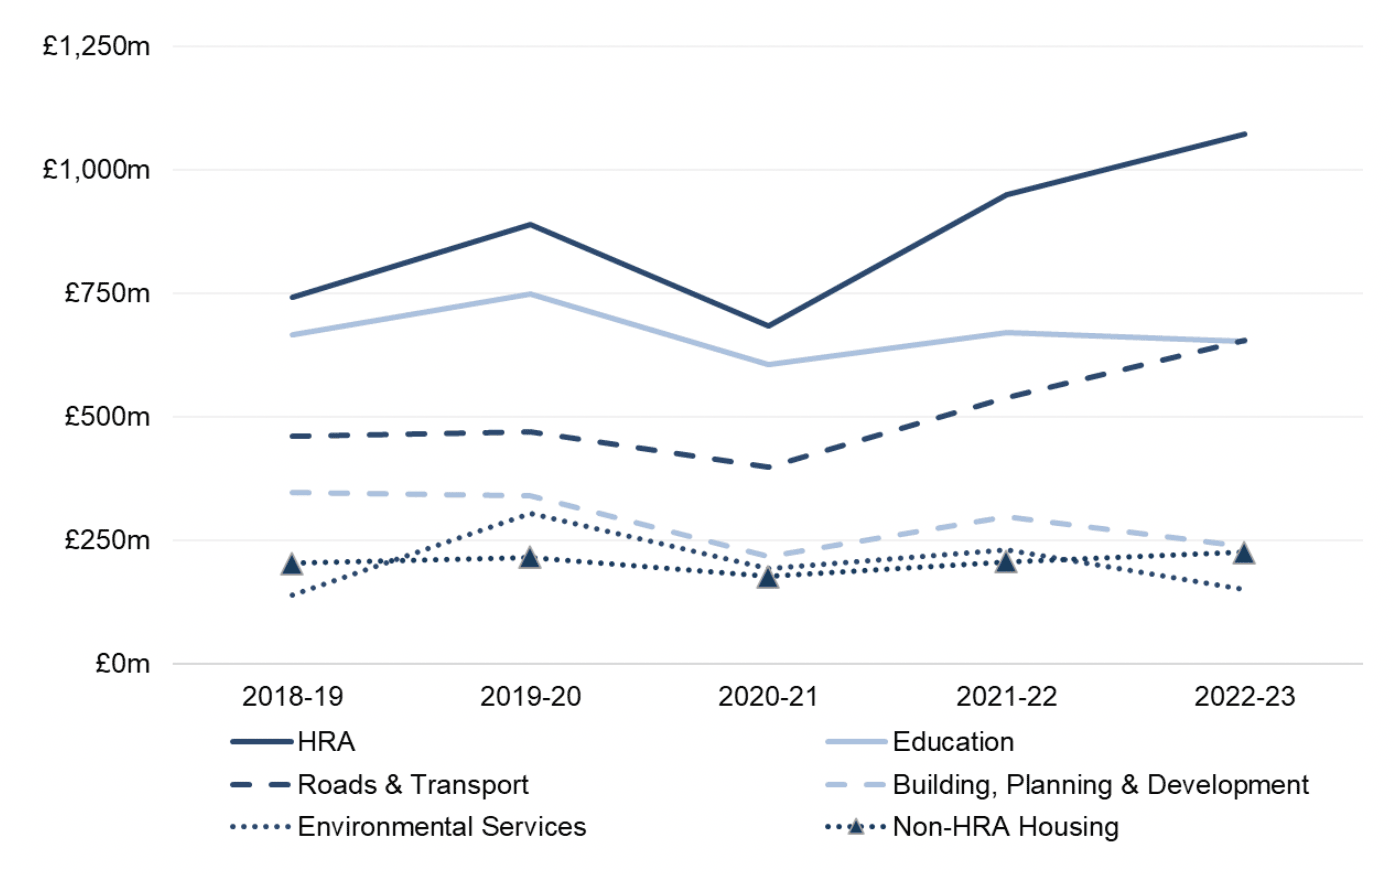 Line chart shows capital expenditure for 2018-19 to 2022-23 for the six services with the highest capital expenditure in 2022-23. Roads & Transport increased by 21.5 per cent (£116 million) and Non-HRA Housing increased by 9.2 per cent (£19 million). Capital expenditure reduced for the following services:  Environmental Services (-34.6 per cent, -£80 million), Building, Planning & Development (-20.5 per cent, -£61 million) and Education (-2.6 per cent, -£18 million).